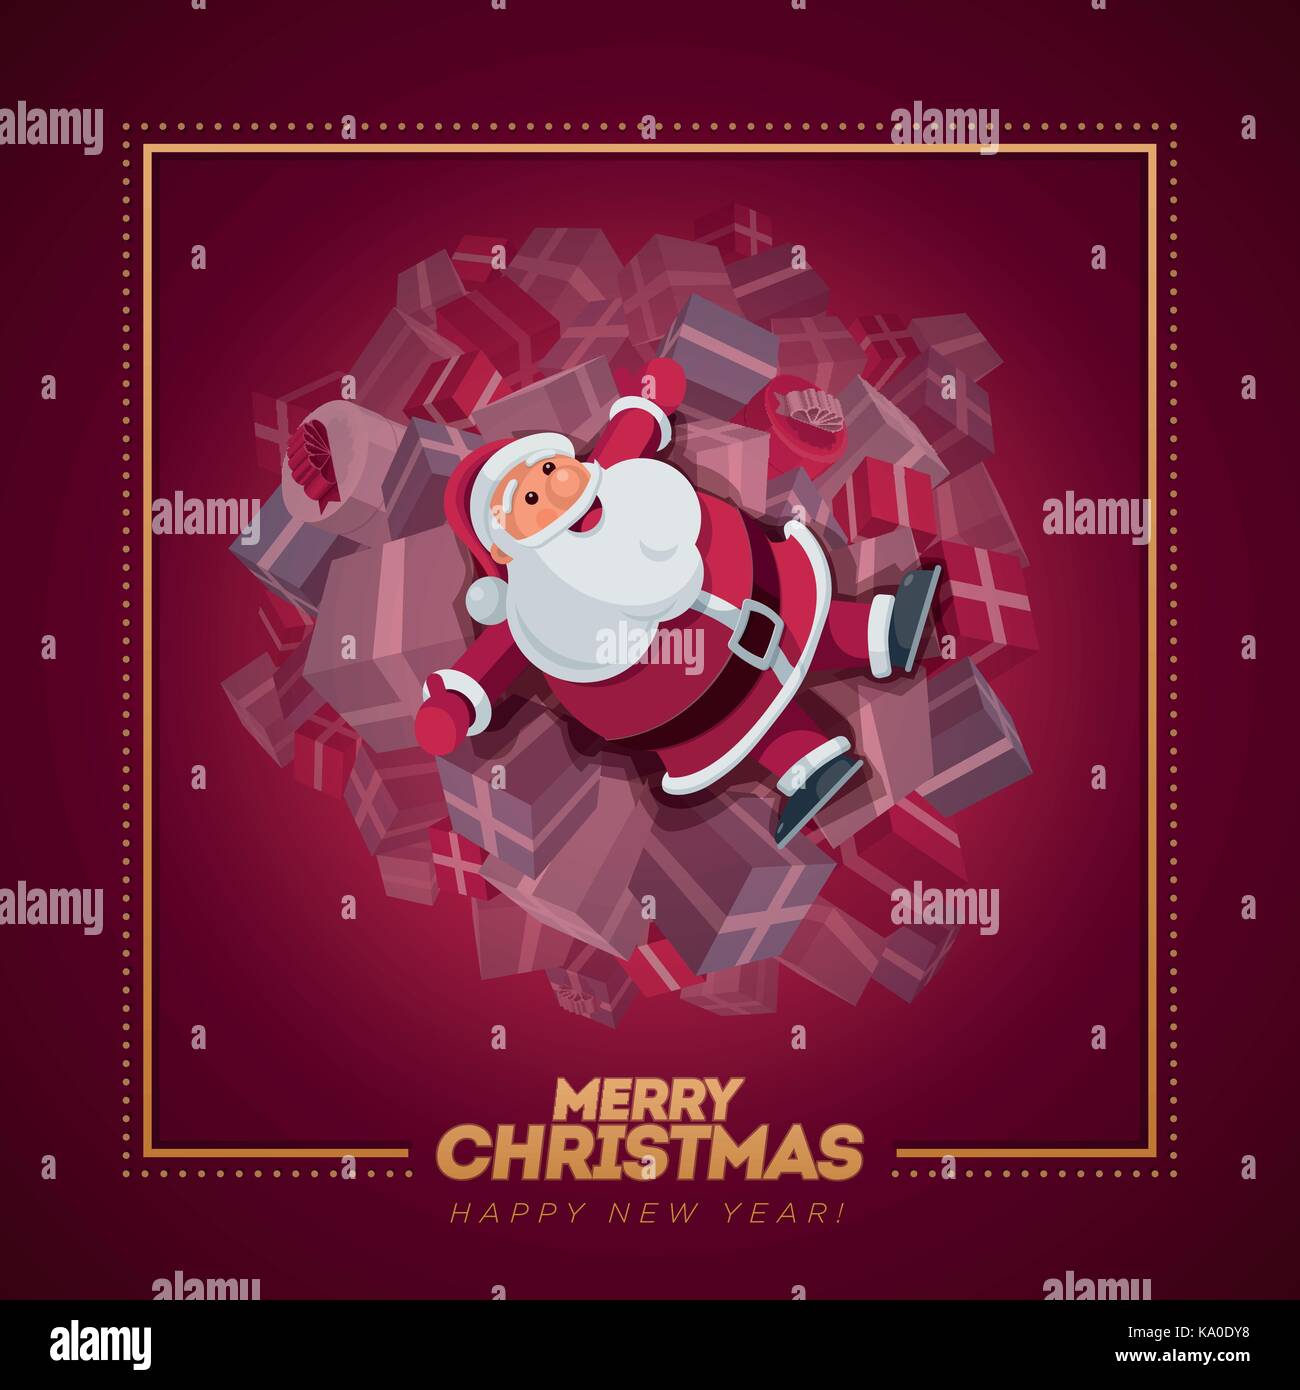 Vector illustration of Santa Claus. Christmas concept design. Santa lying down on lot of gift boxes. Stock Vector